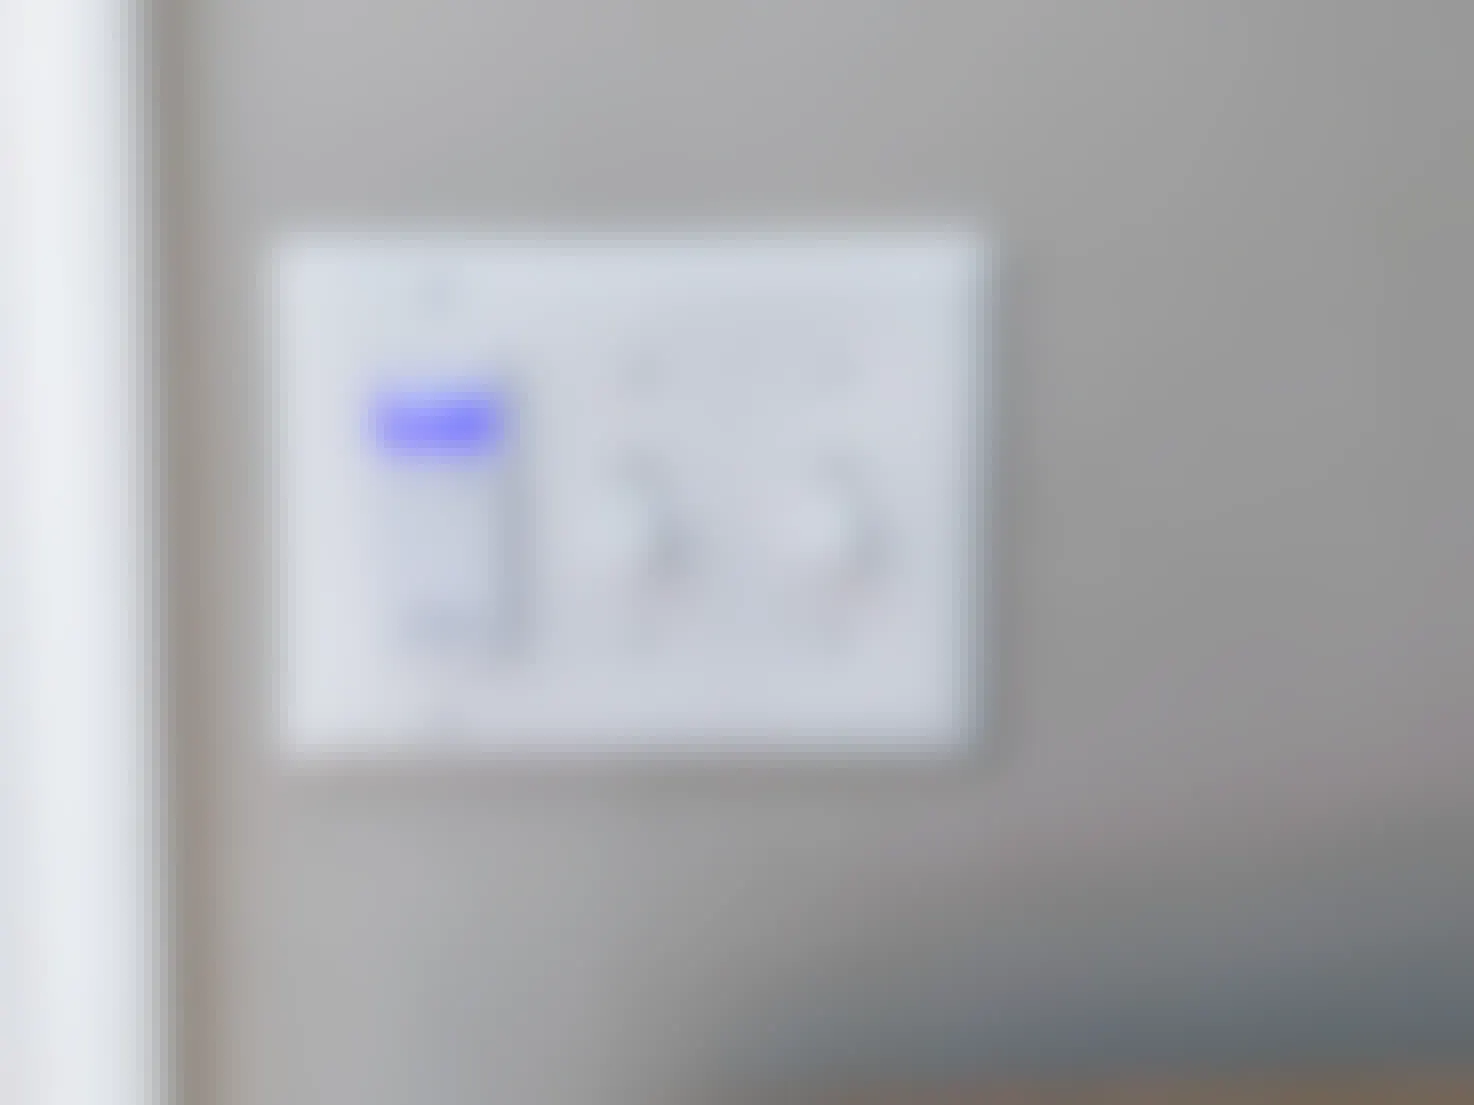 A programmable light switch timer installed next to two normal light switches on a wall.